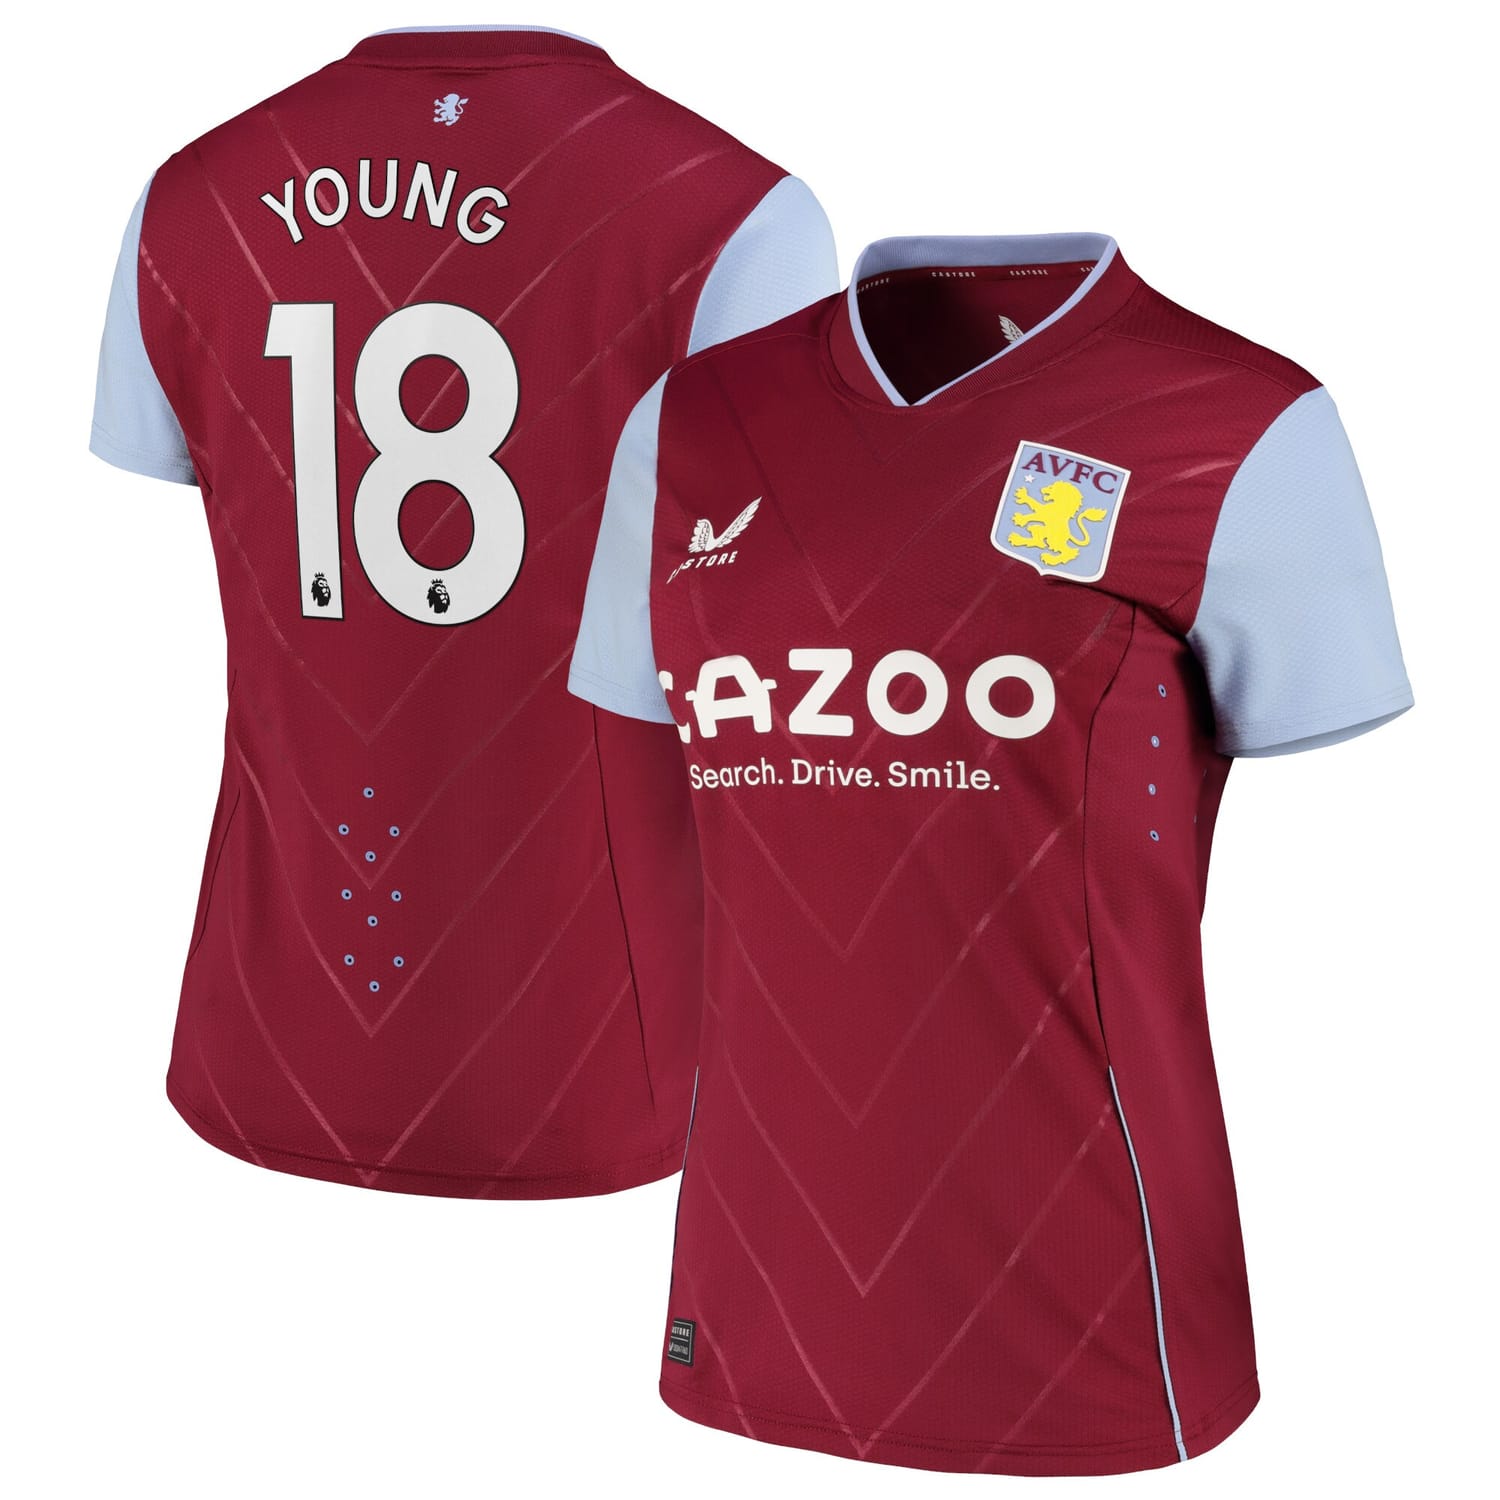 Premier League Ast. Villa Home Pro Jersey Shirt 2022-23 player Ashley Young 18 printing for Women